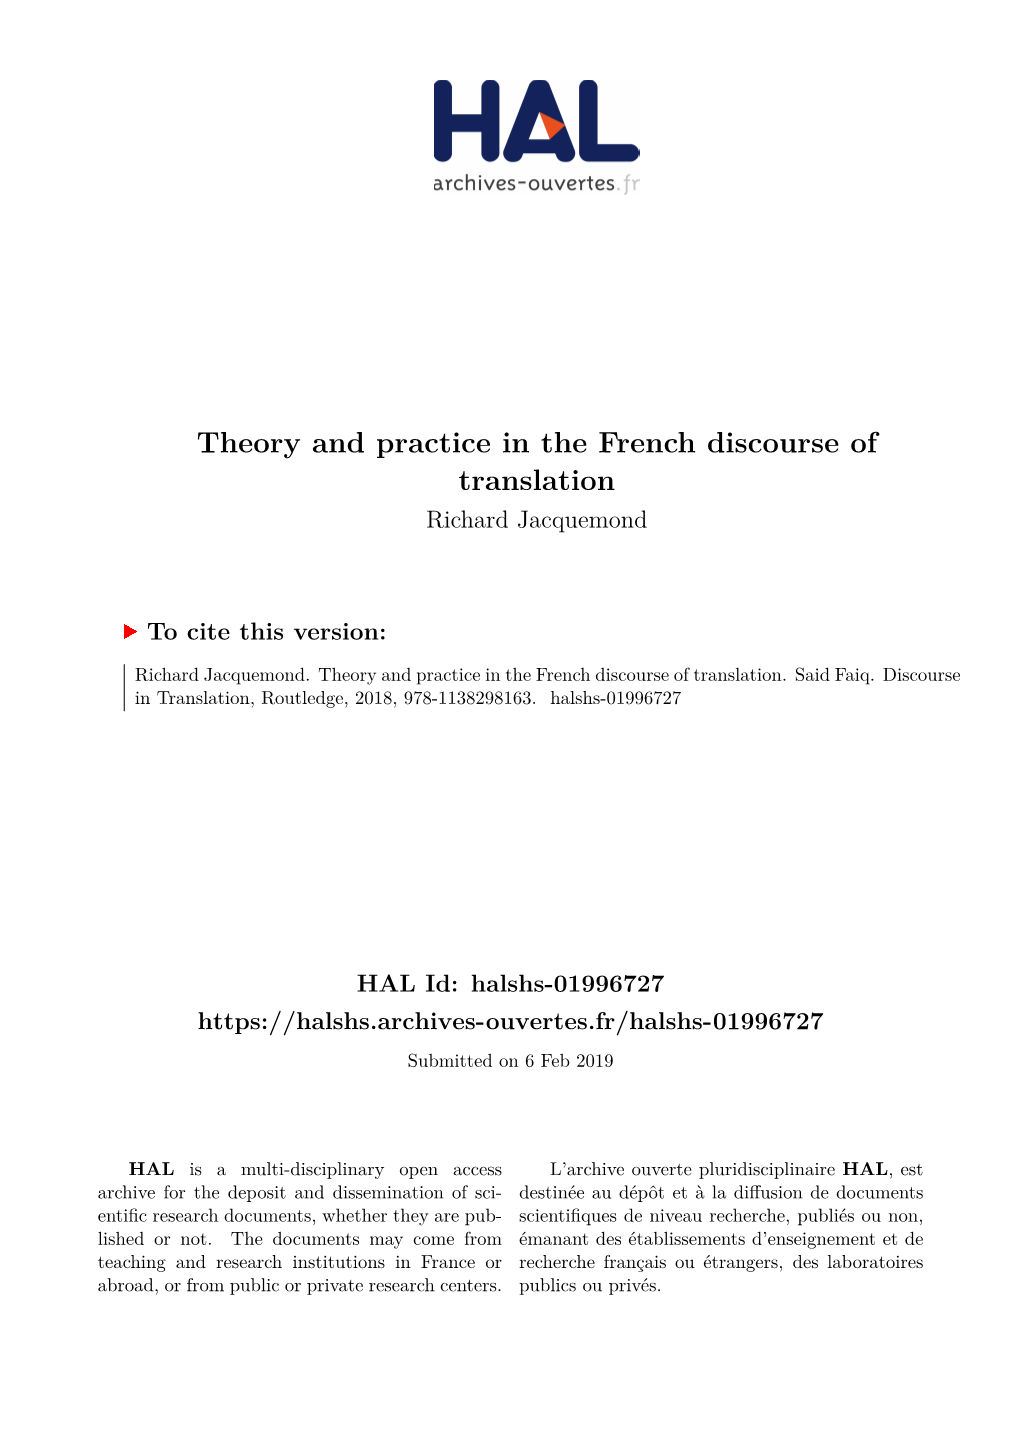 Theory and Practice in the French Discourse of Translation Richard Jacquemond